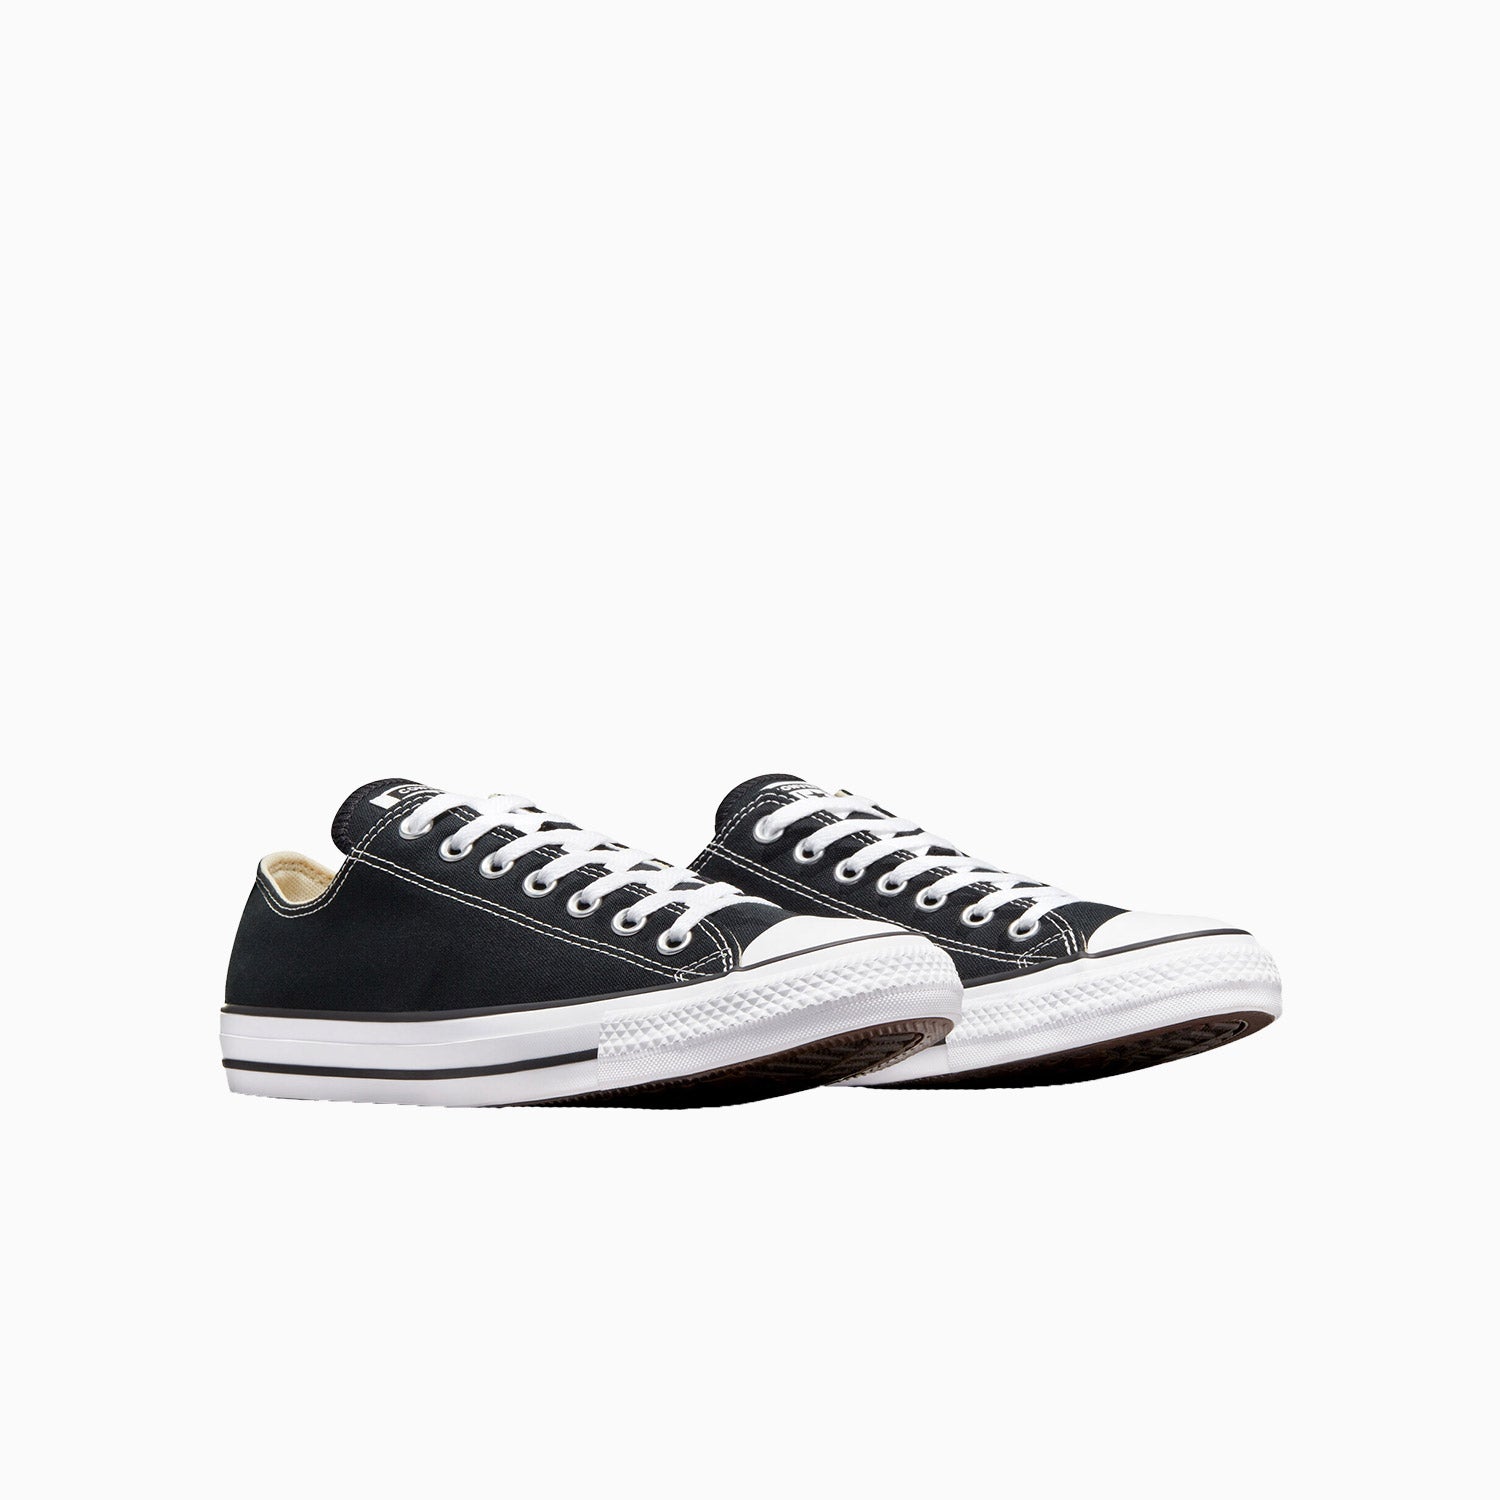 converse-chuck-taylor-all-star-ox-shoes-m9166